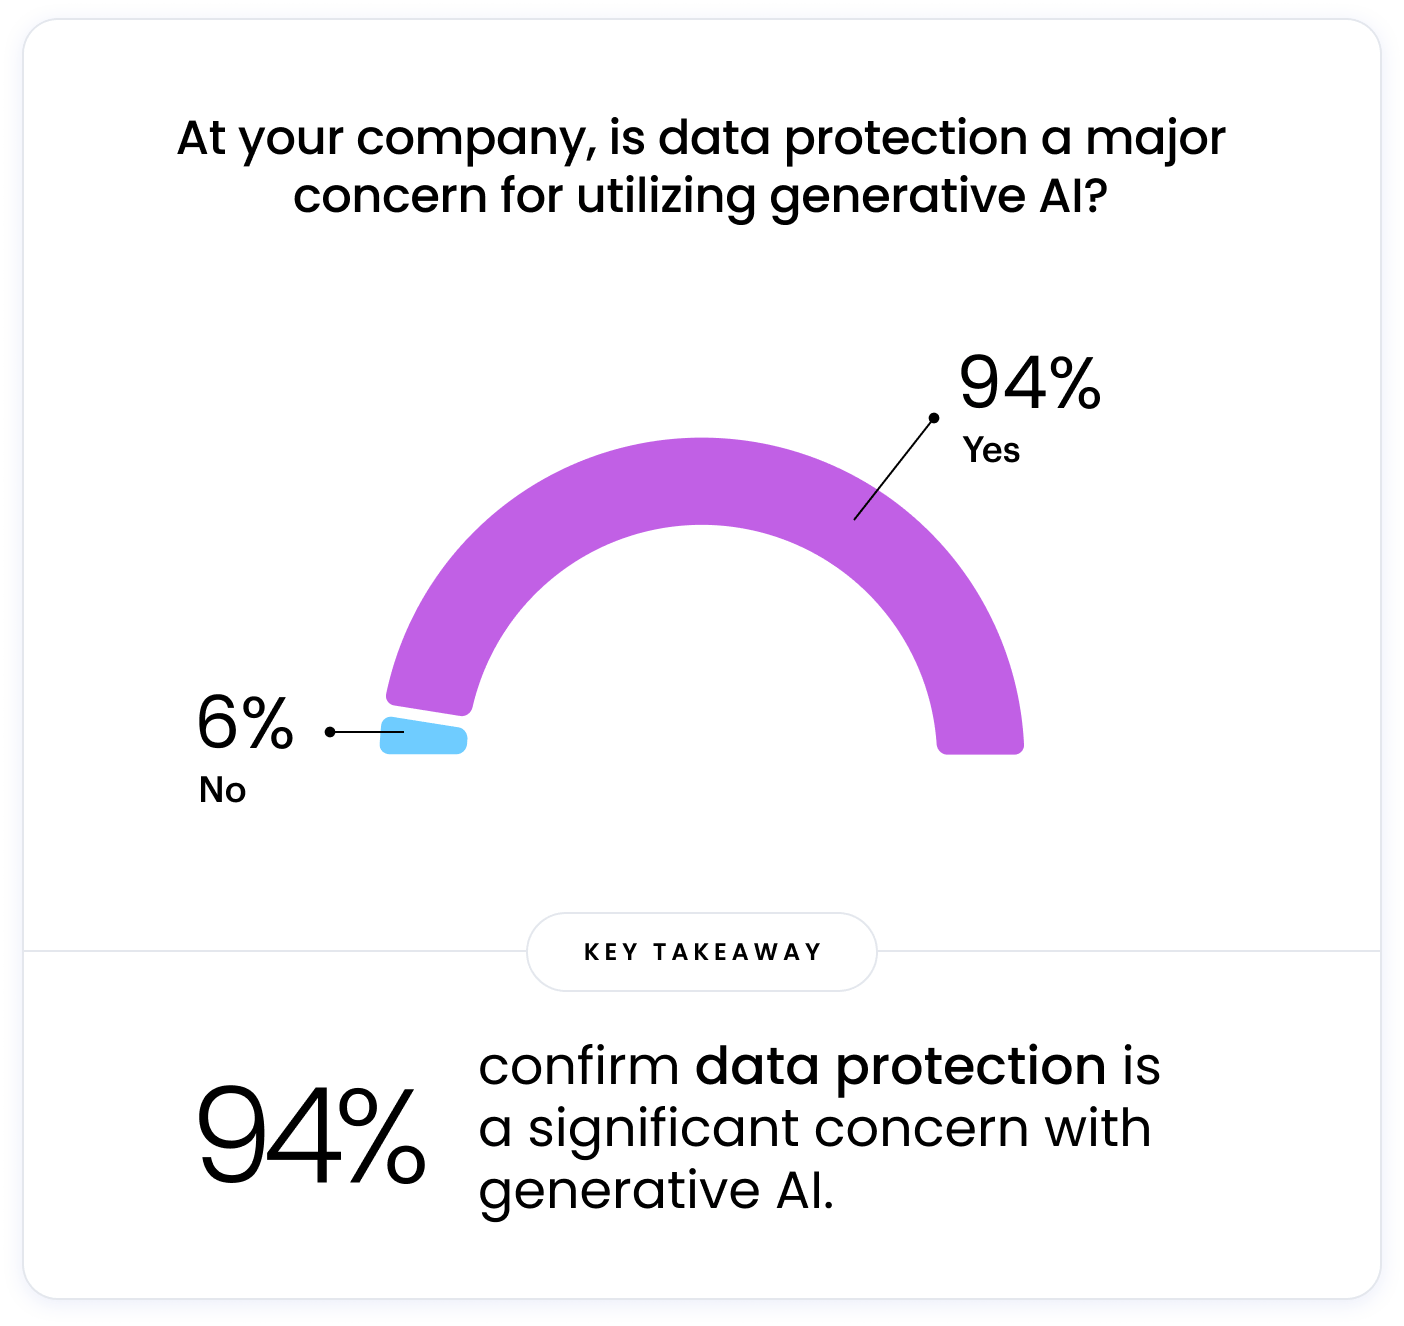 This image is a snapshot of the collective concern at companies: 94% of the companies surveyed are keeping a watchful eye on data protection as we dive into the world of generative AI.